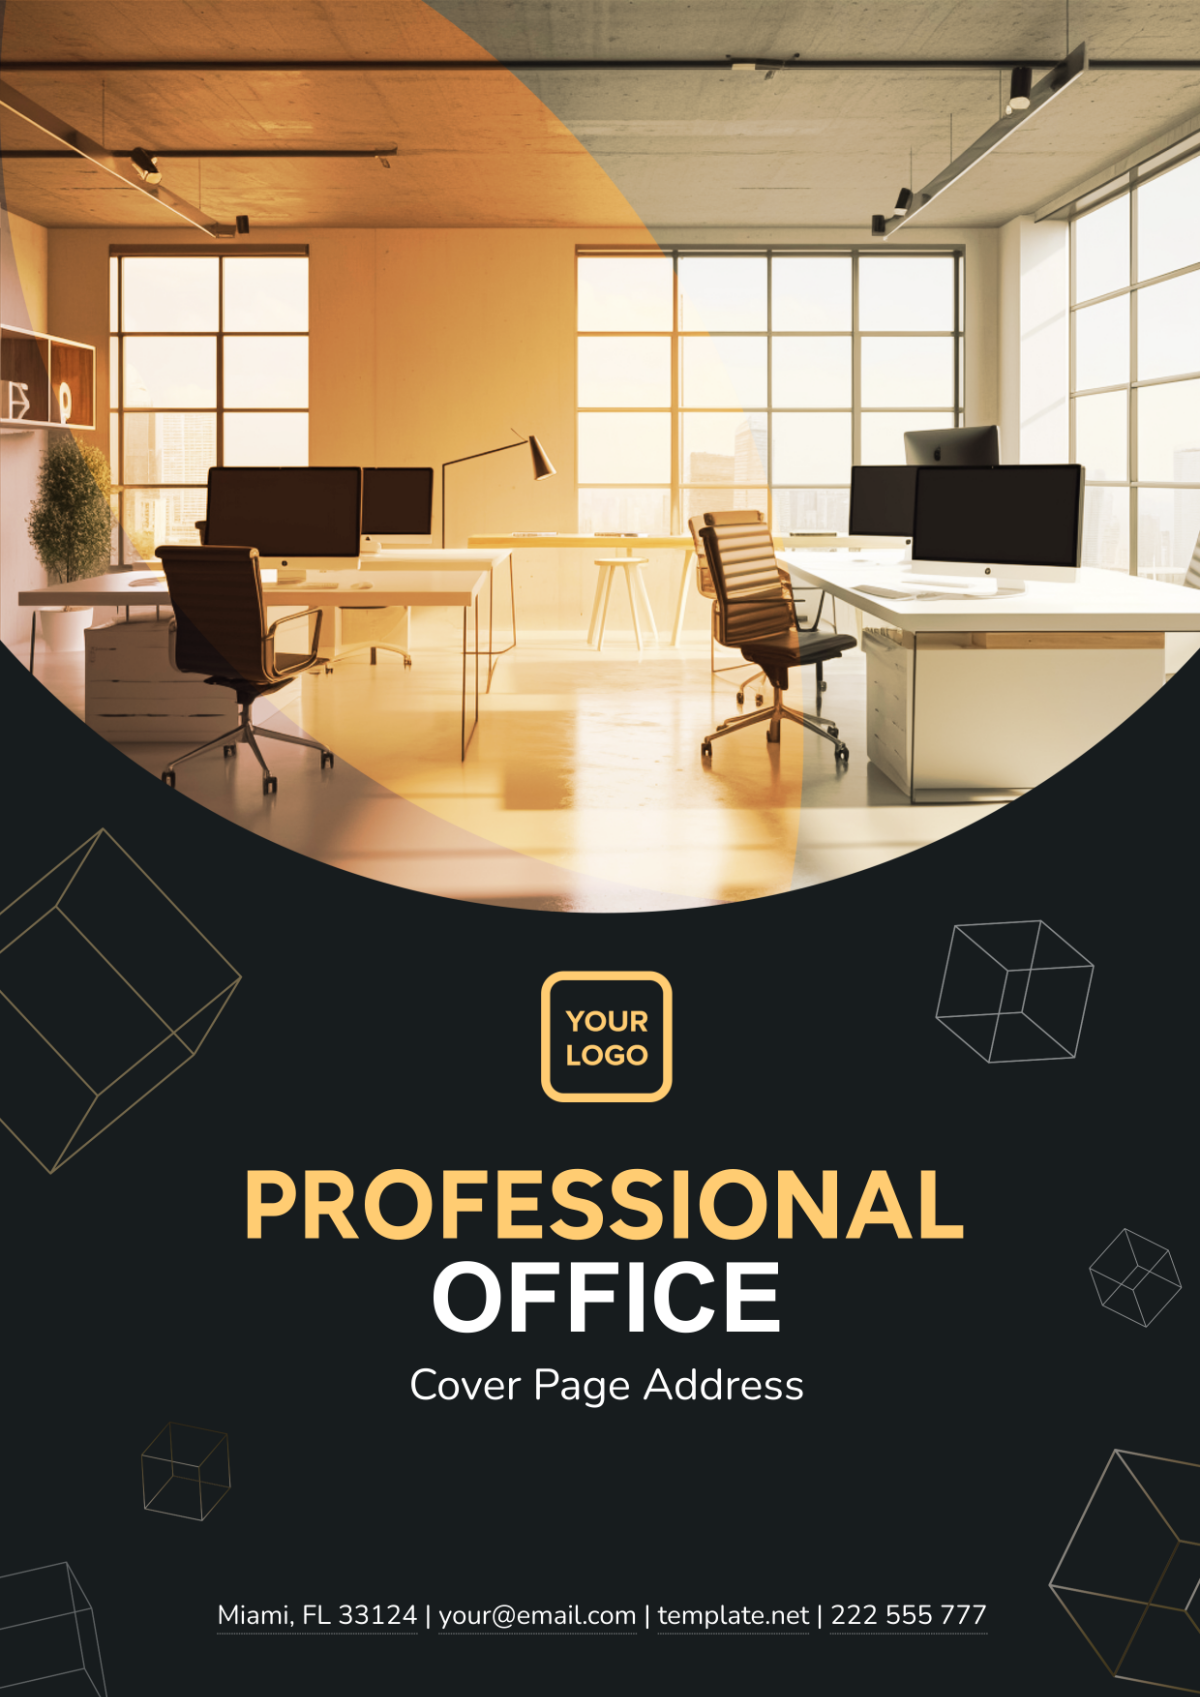 Professional Office Cover Page Address